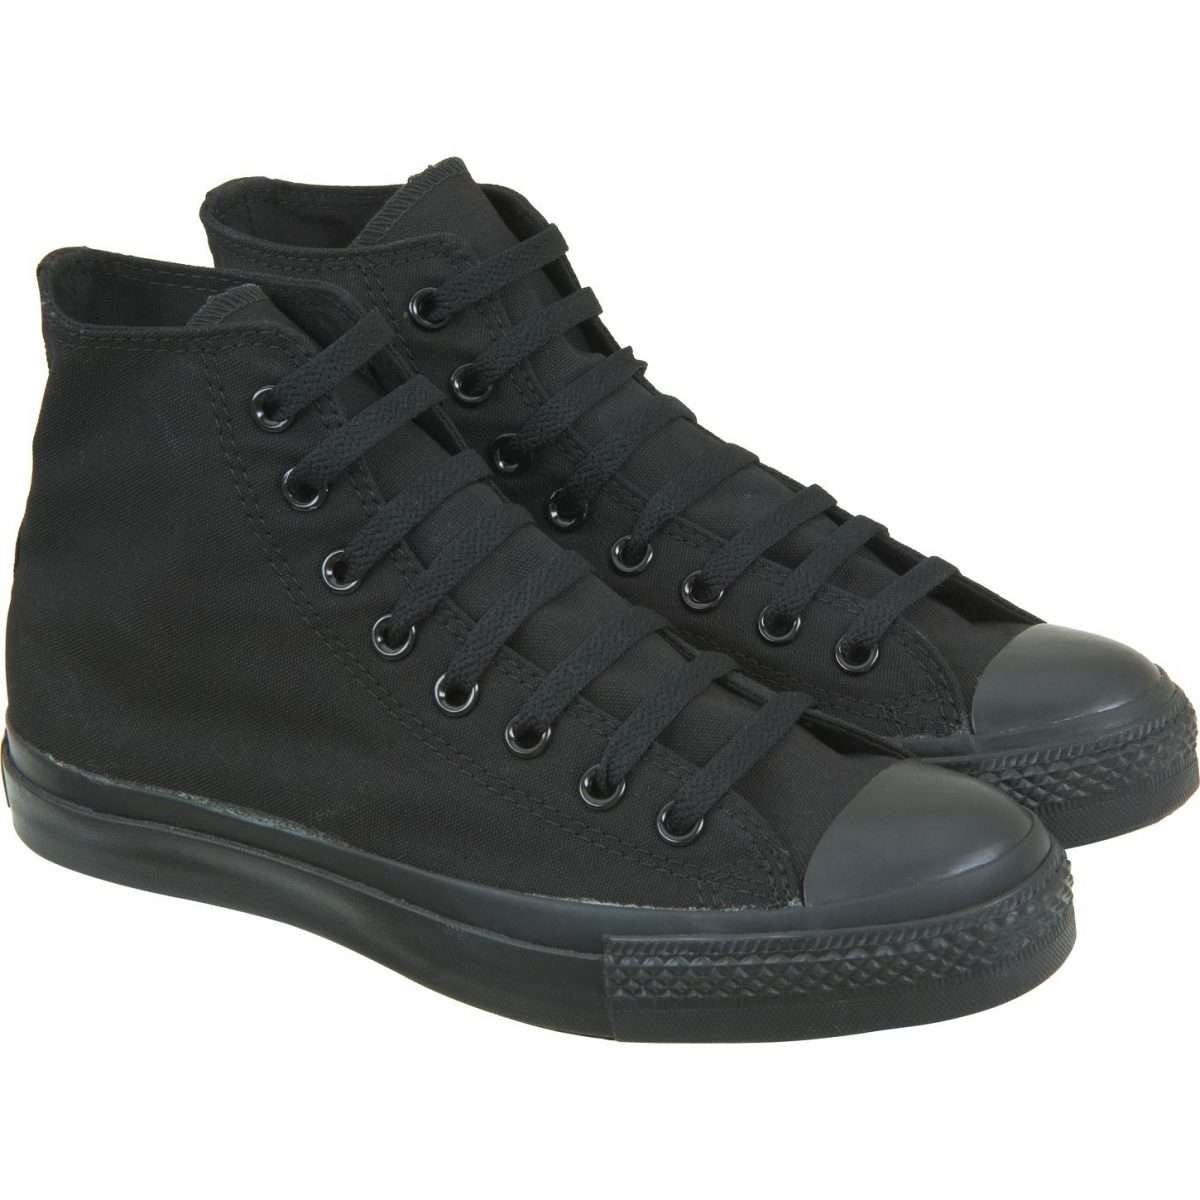 Unisex All Black CAnvas Hi Tops Boots Trainers Lace Up Mono Shoes